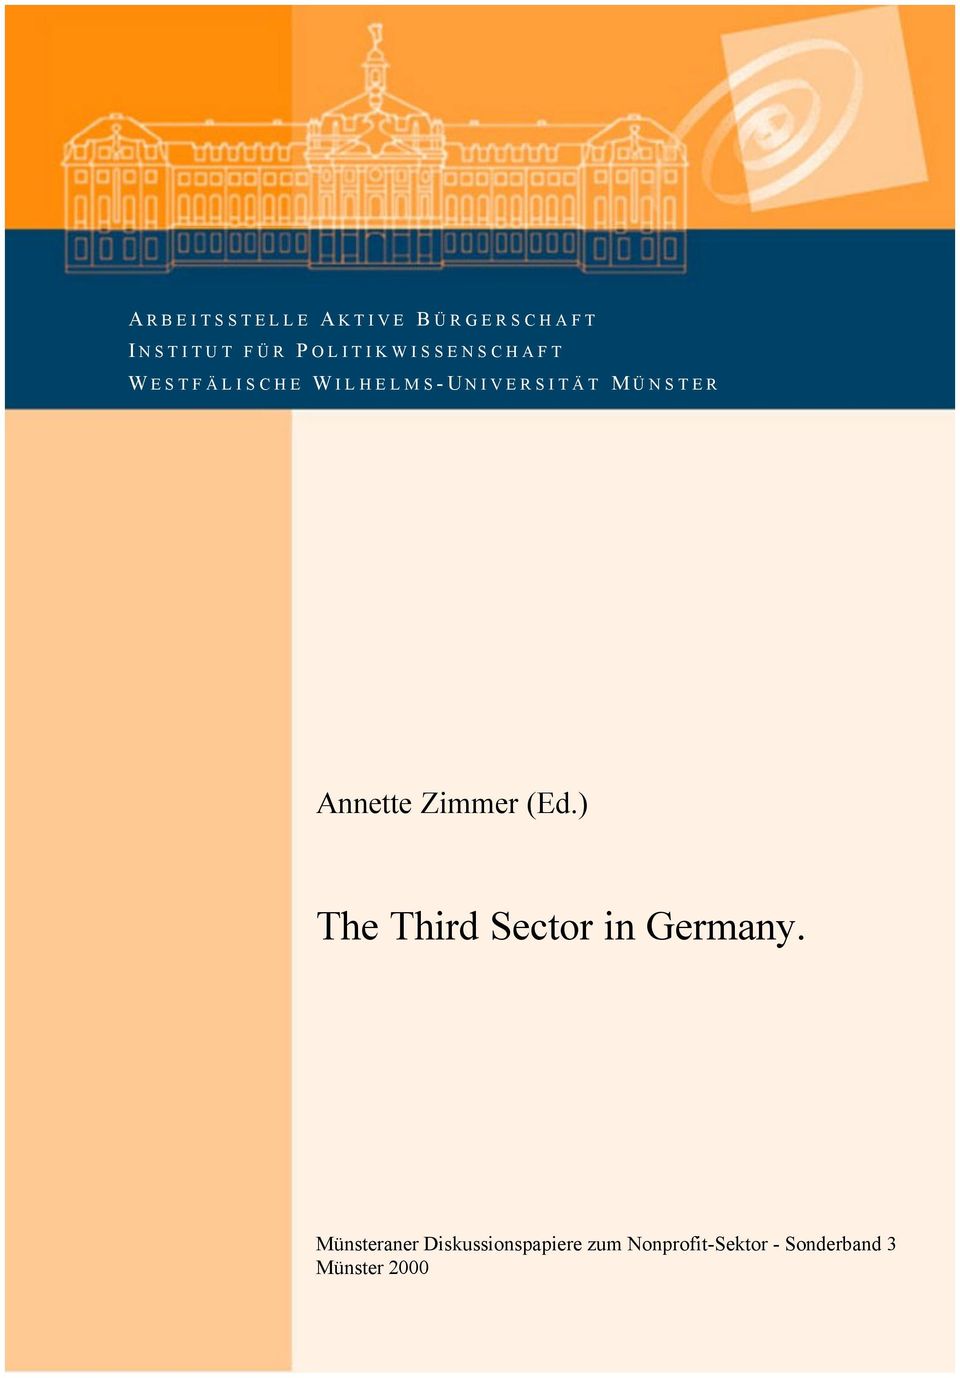 ÜNSTER Annette Zimmer (Ed.) The Third Sector in Germany.